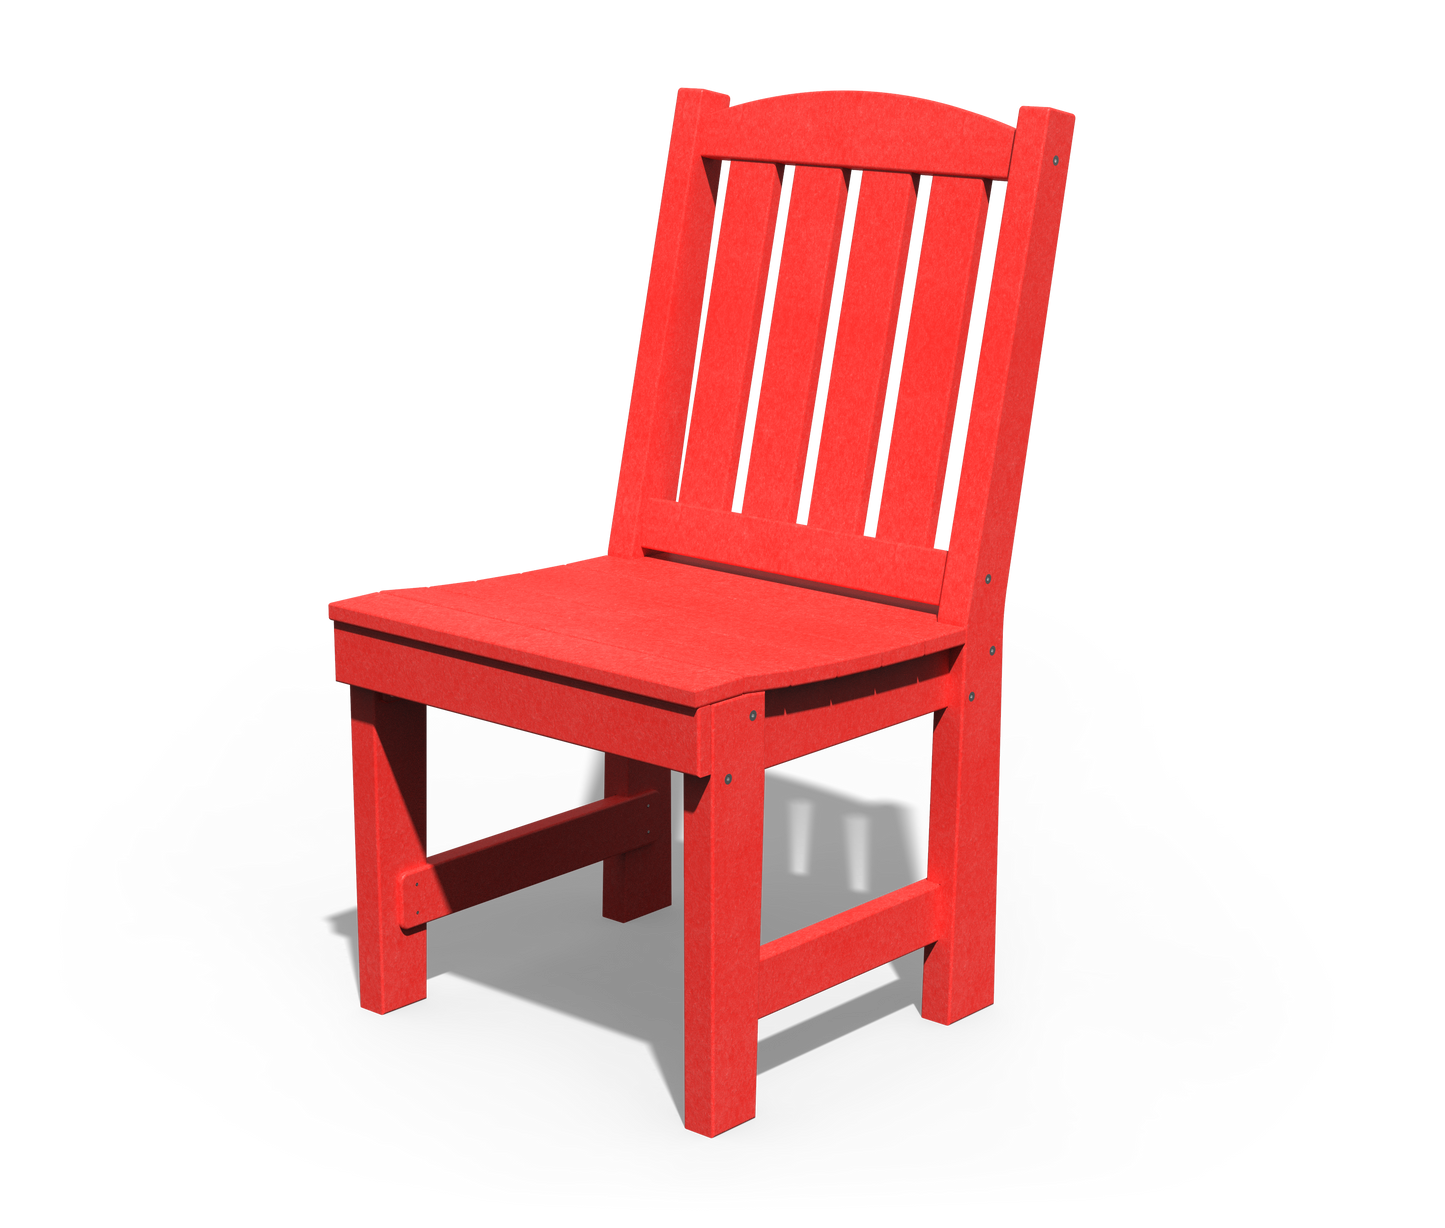 Patiova Recycled Plastic English Garden Dining Side Chair - LEAD TIME TO SHIP 3 WEEKS